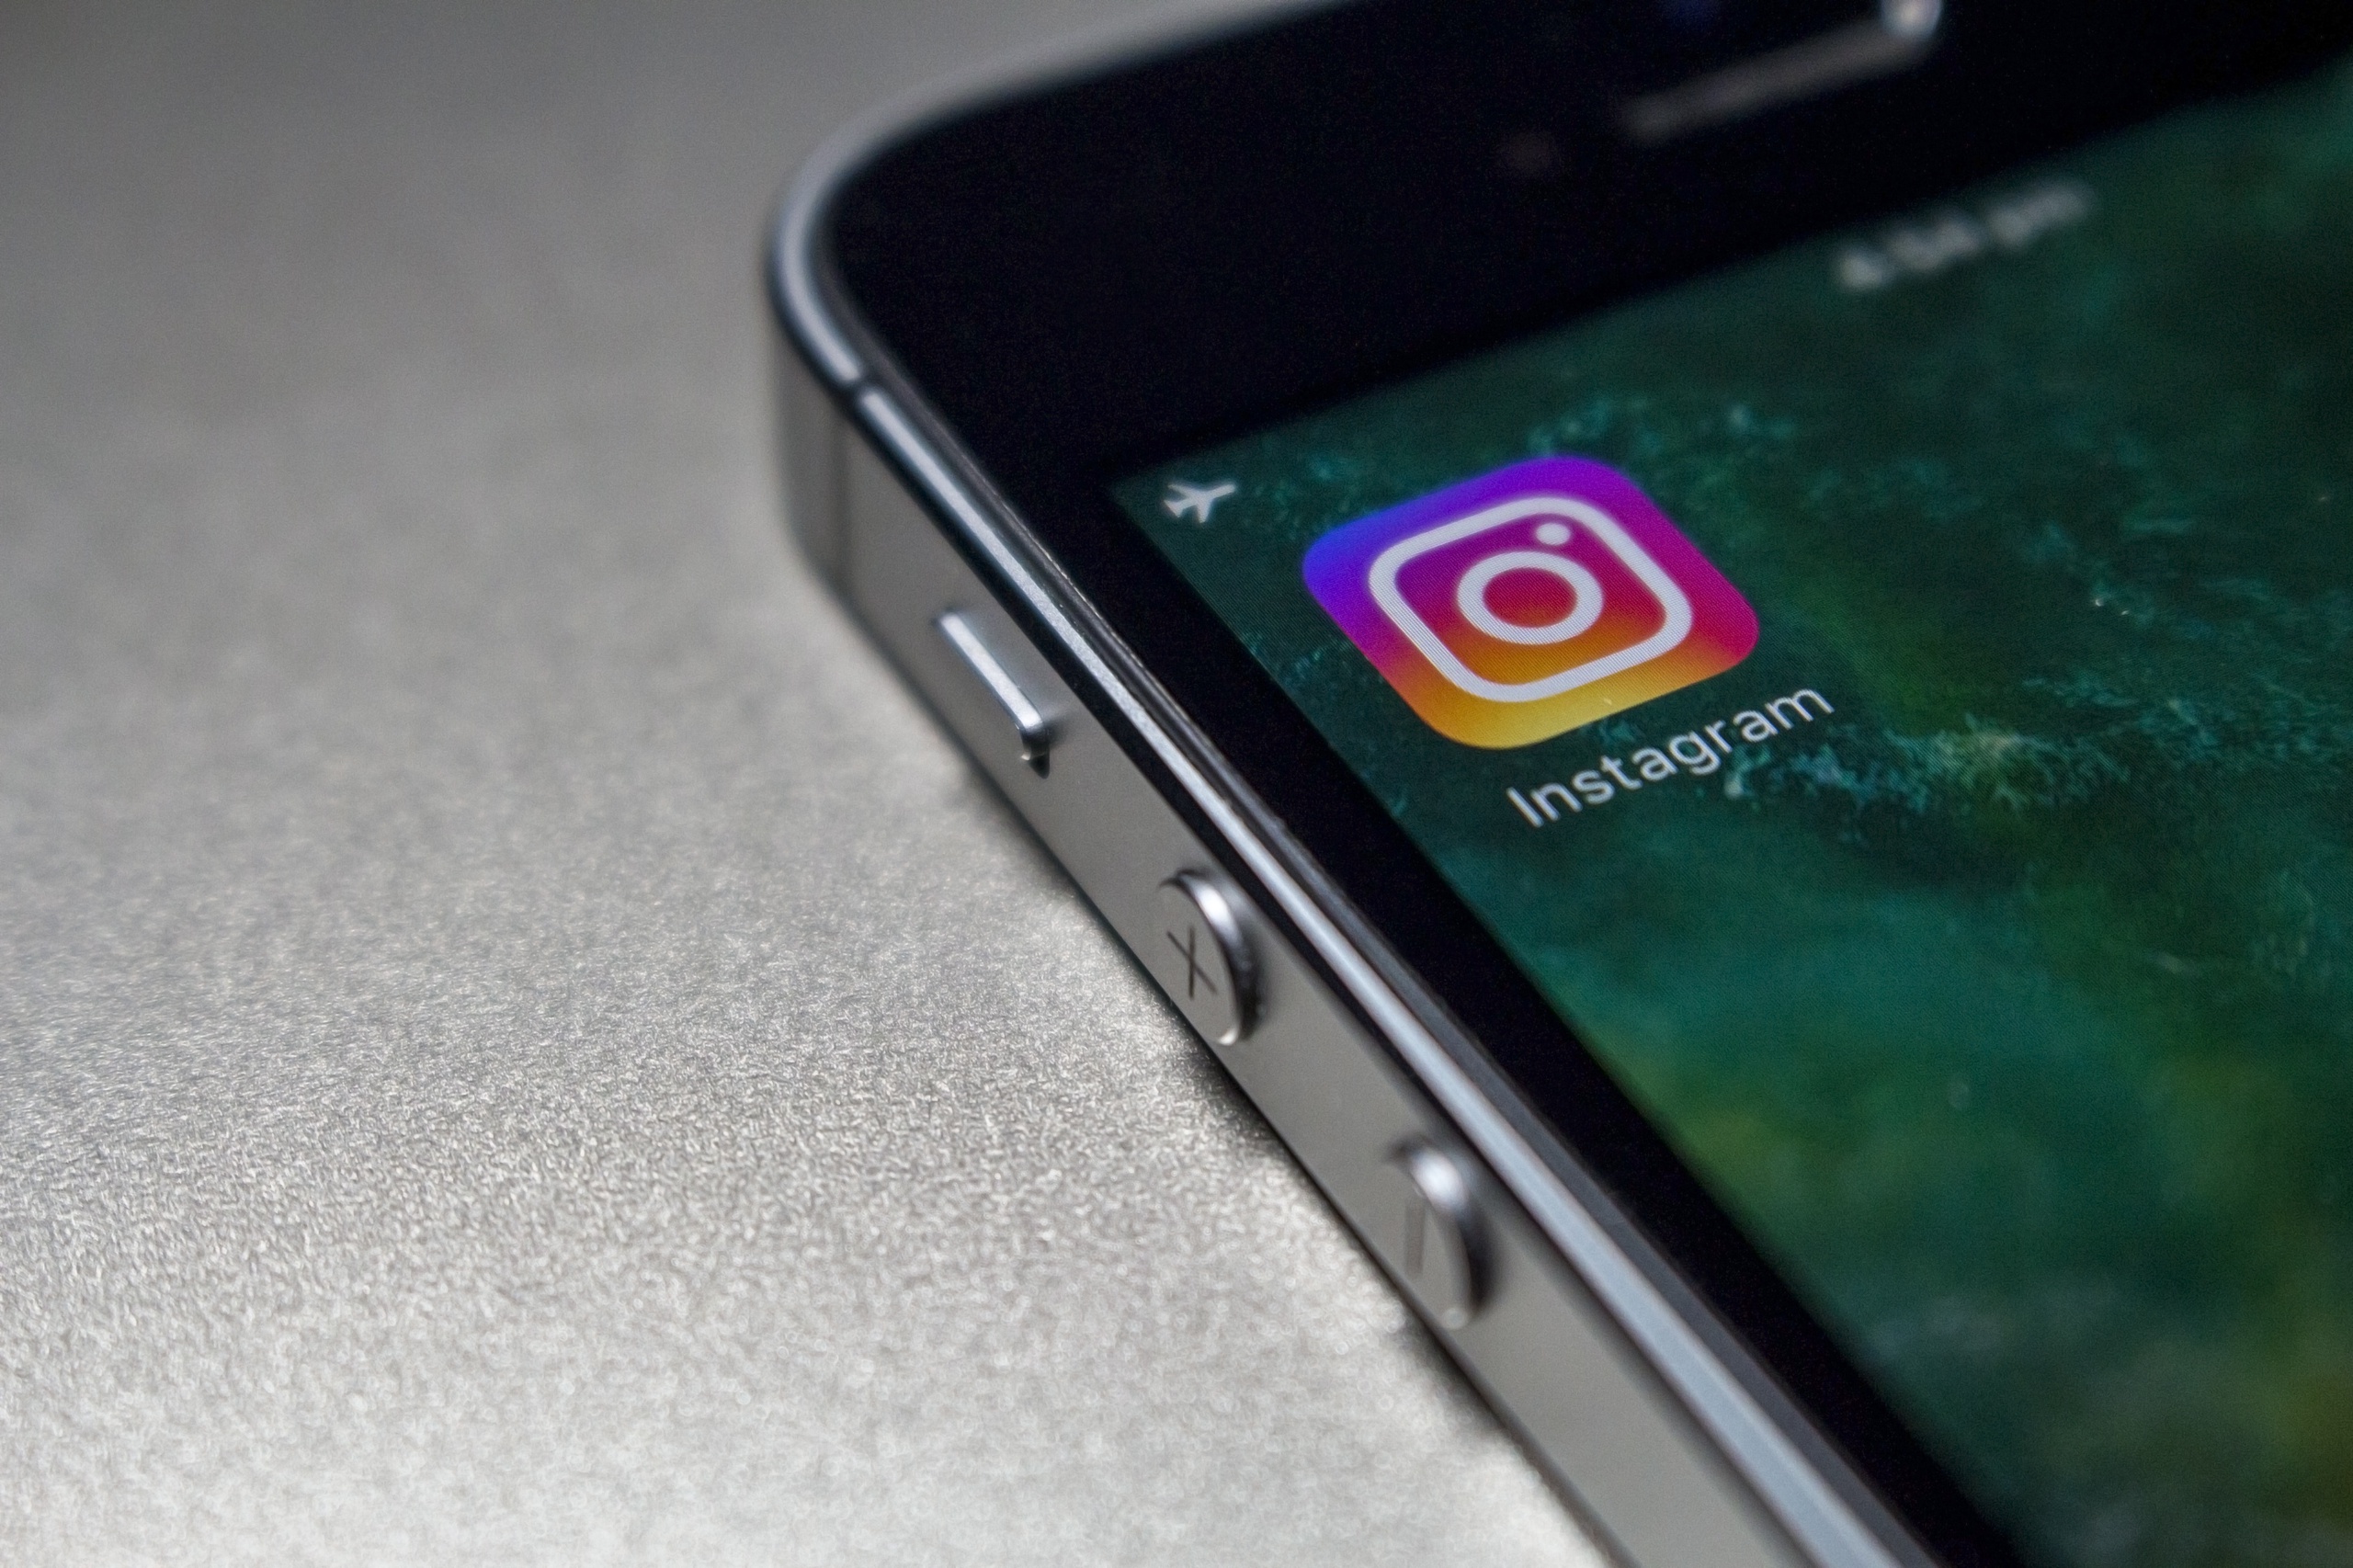 Meta Platforms, the parent company of Facebook and Instagram, is likely to announce another major reorganization this week.